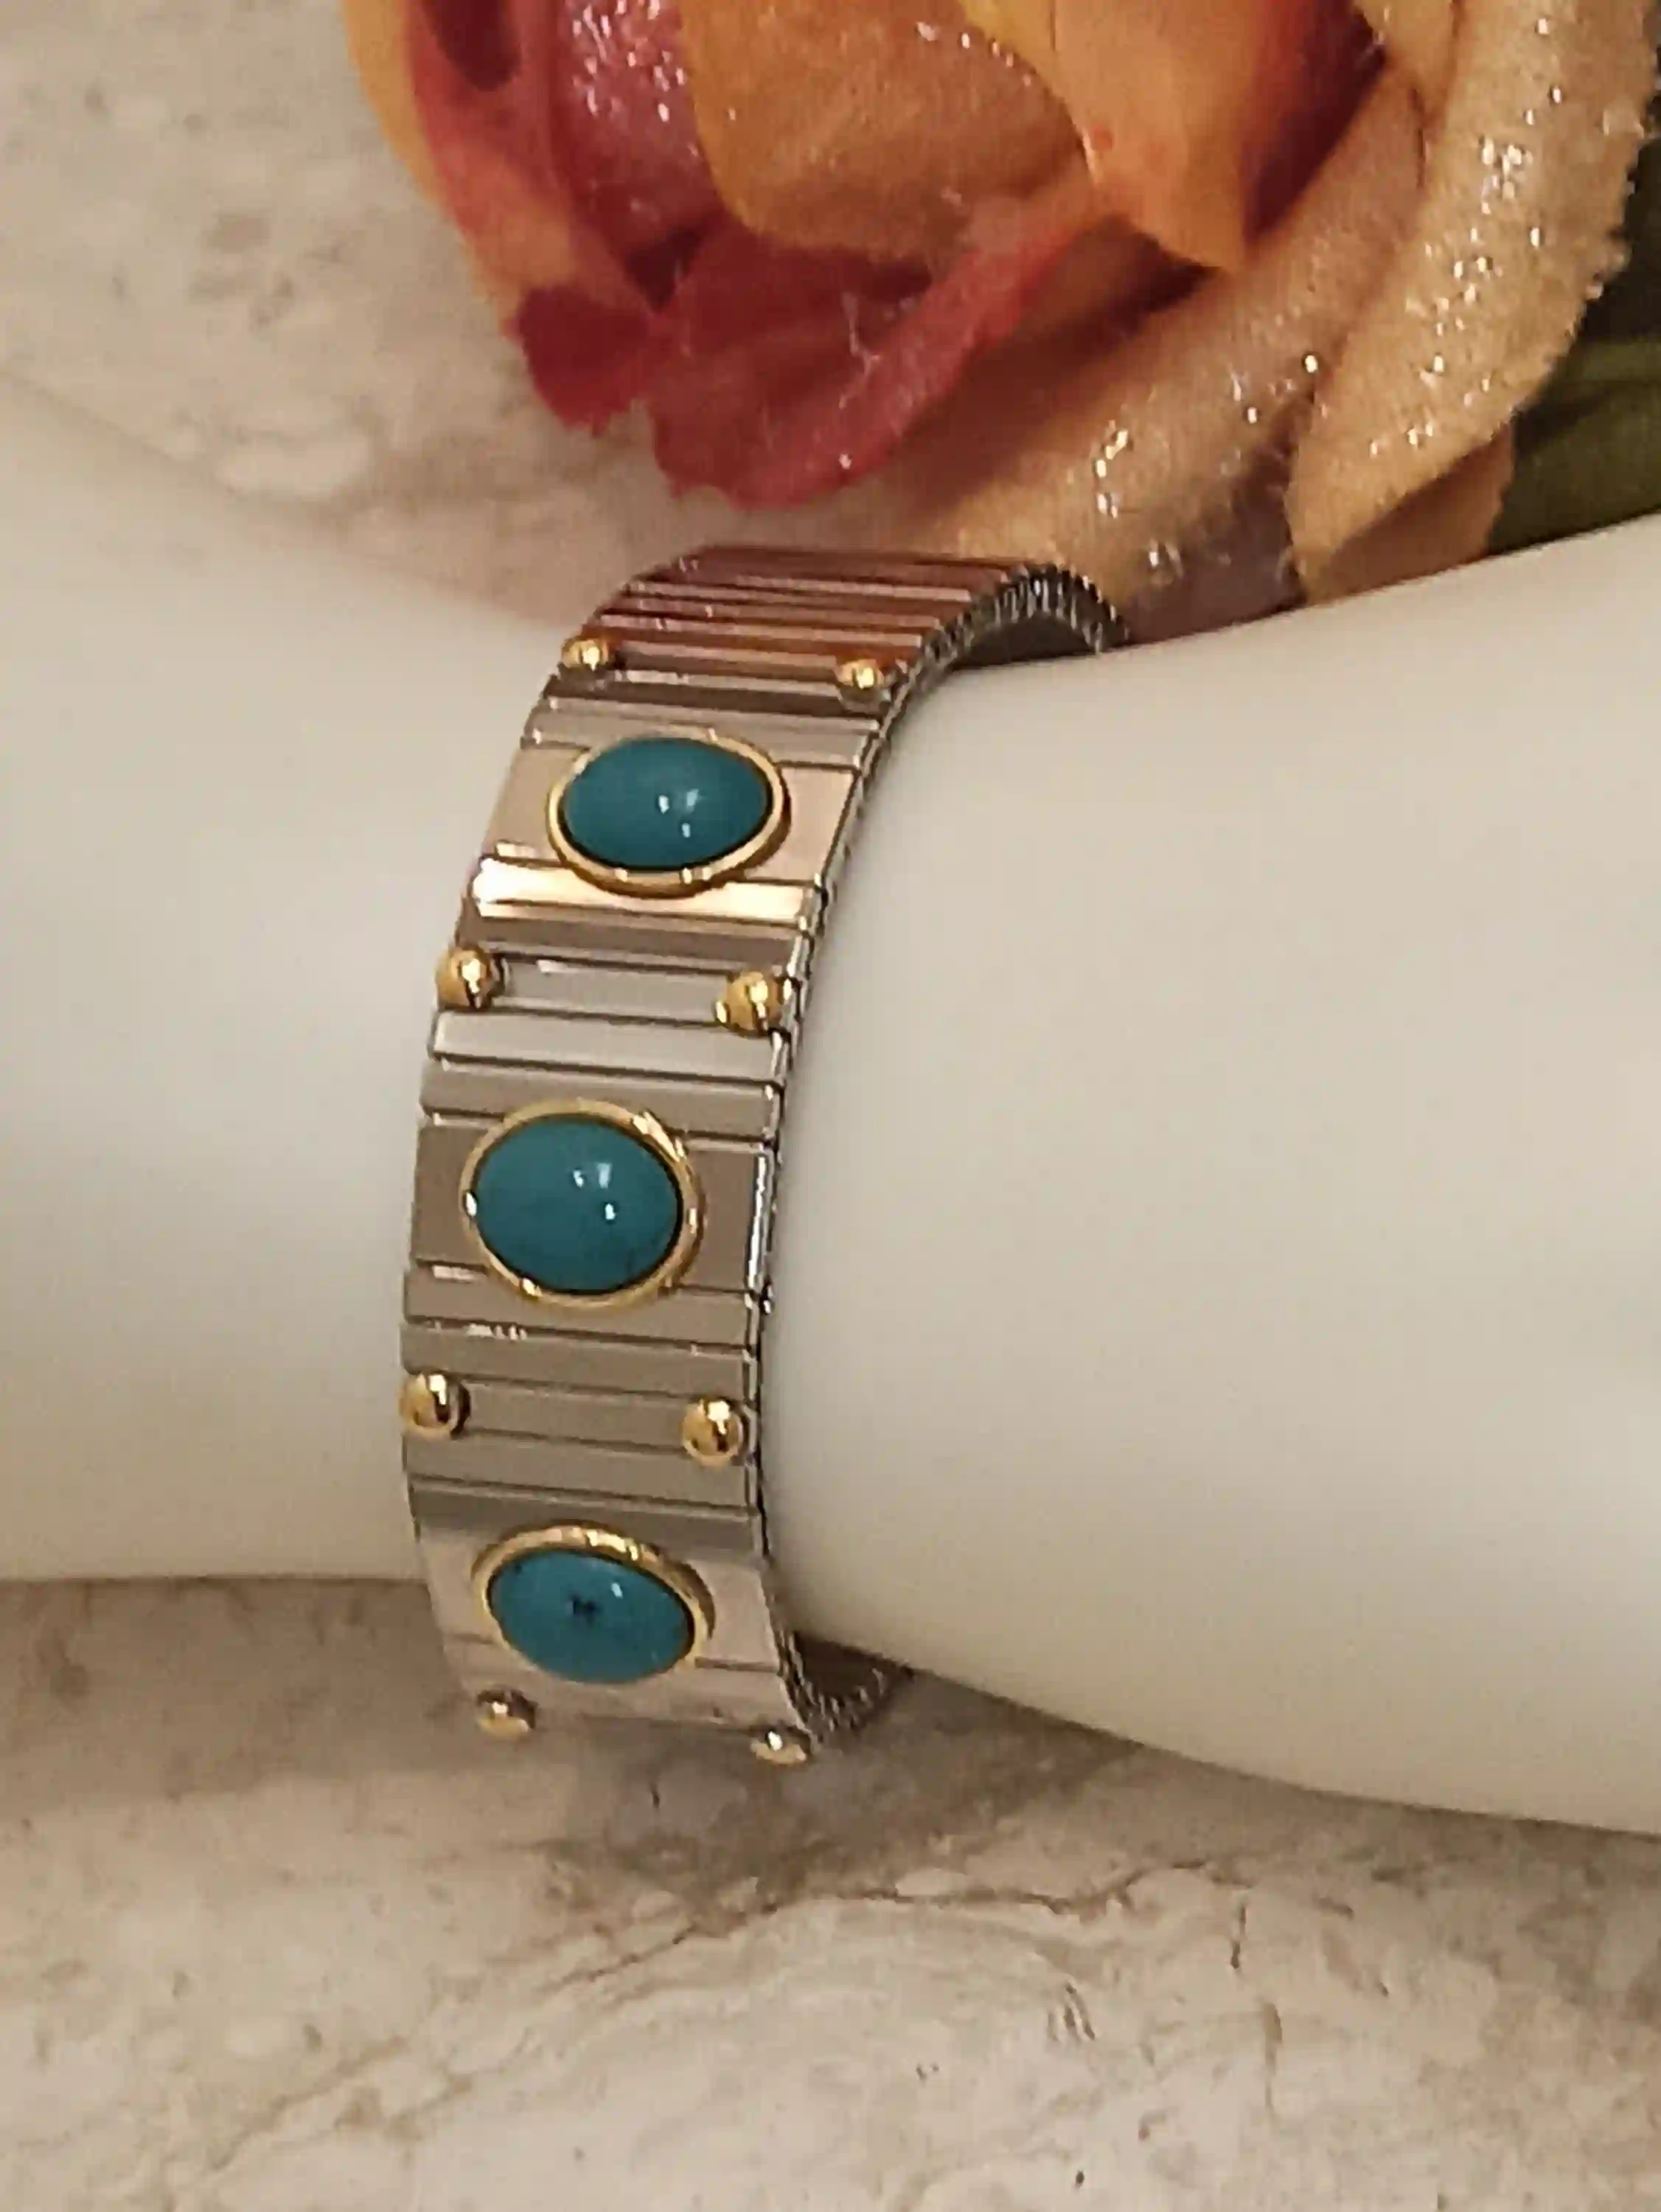 9ct Turquoise Bracelet and Ring Jewelry /Turquoise Jewelry/Jewelry Gift/Mothers Day Bracelet Ring/Mother Gift/Mothers Day Gift from daughter 